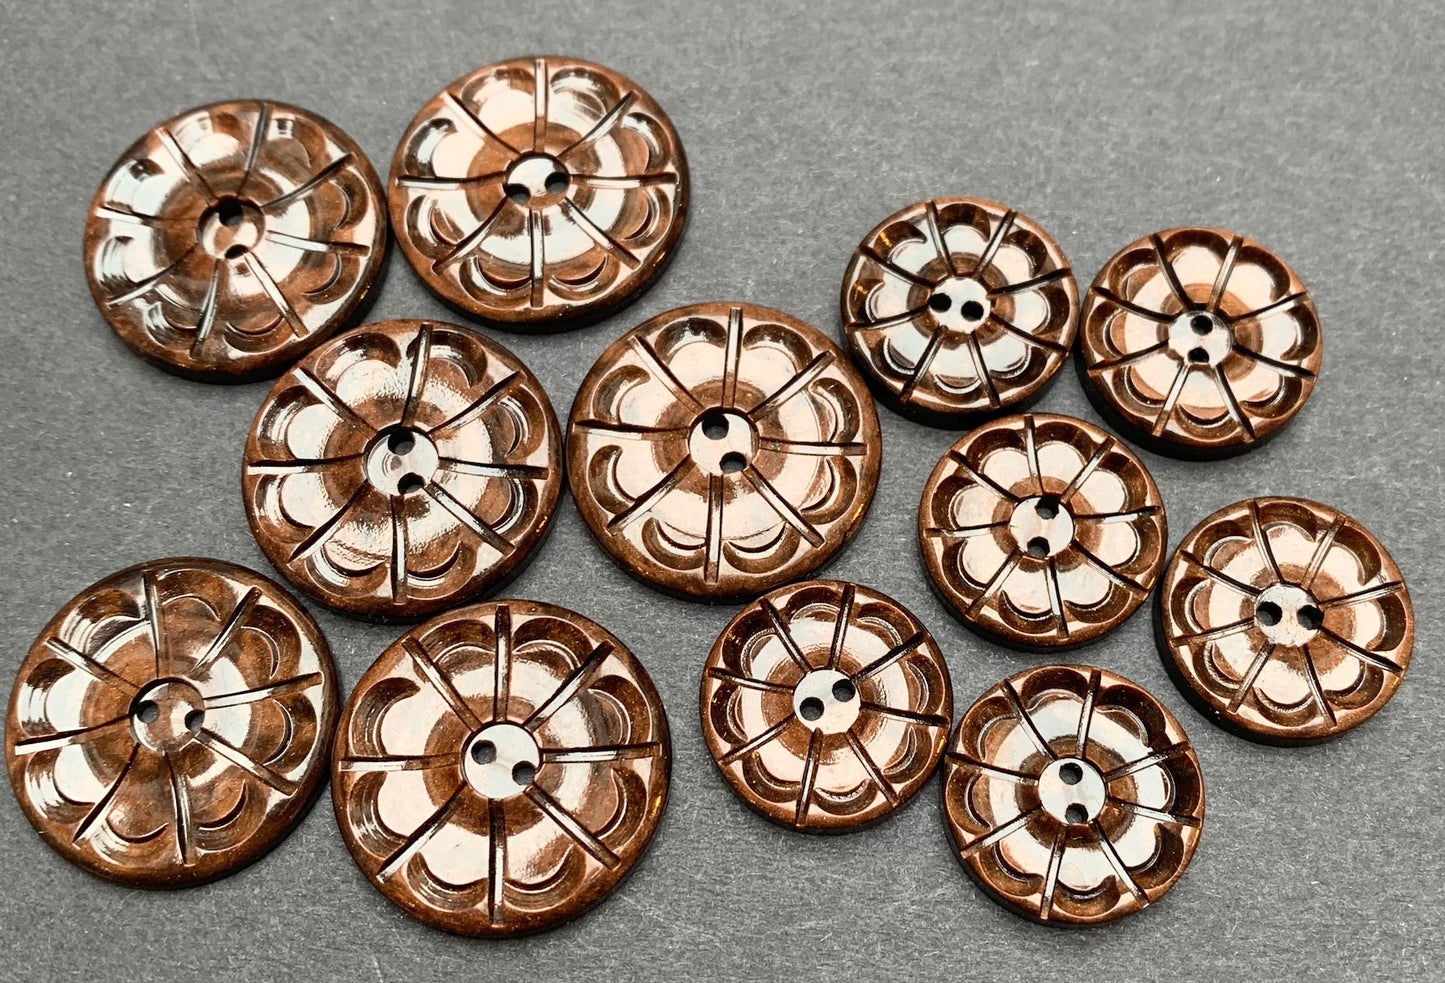 Shiny Mahogany Brown French  1.5cm or 2.2cm Buttons.